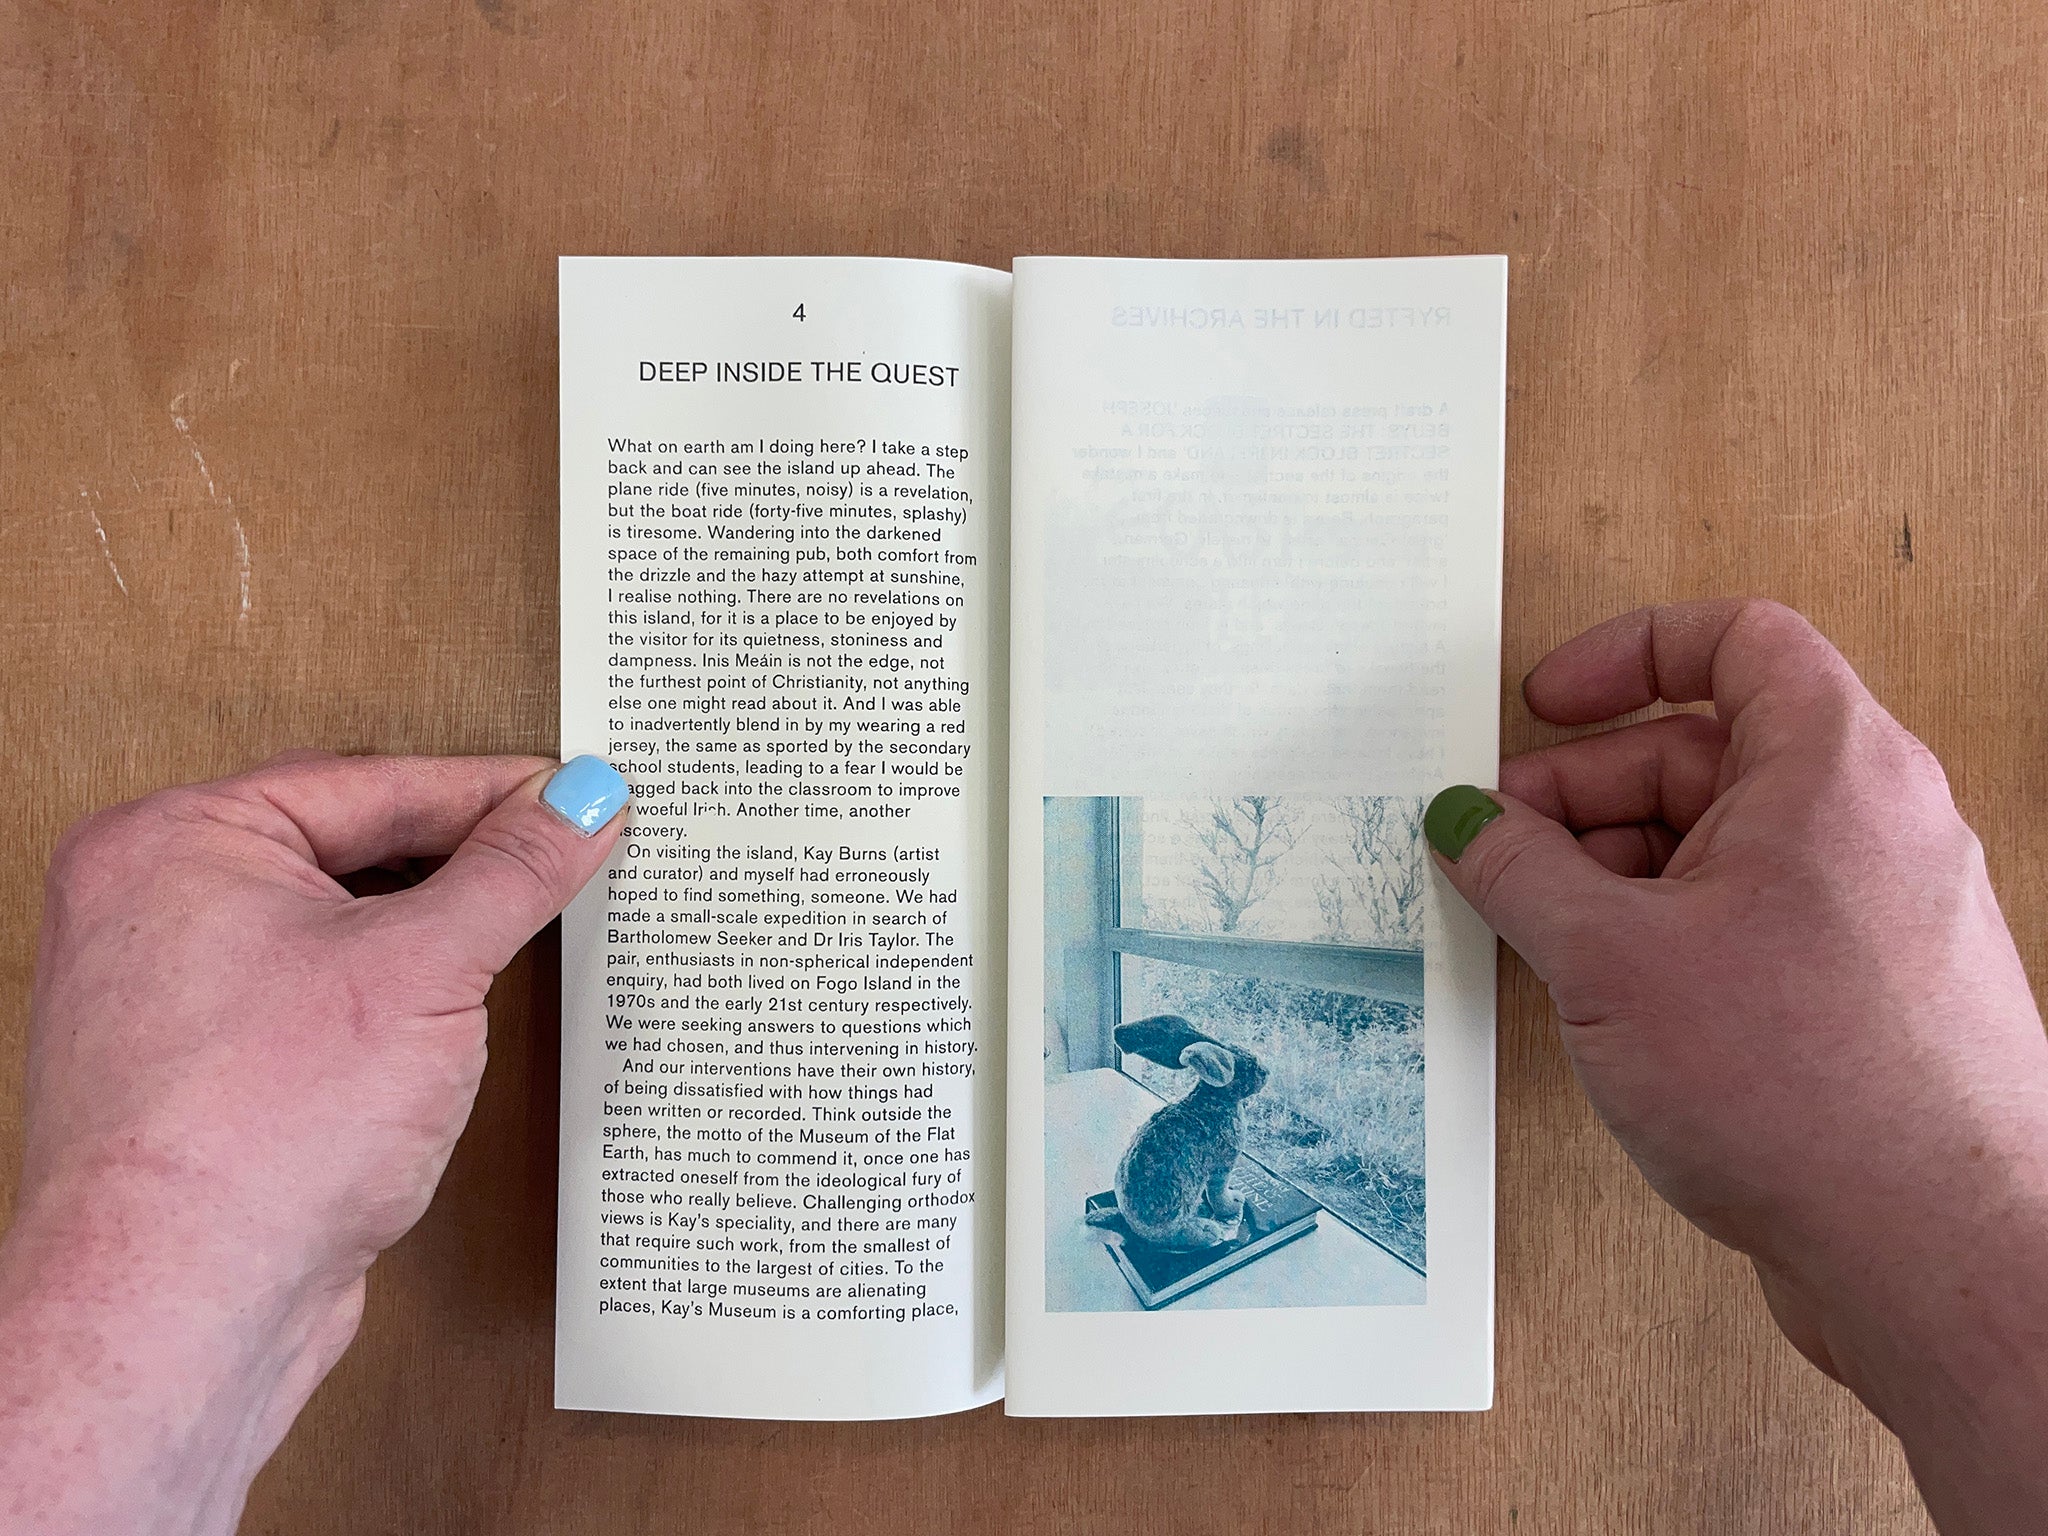 FOLDERS AND SEEKERS: THE REPORT OF THE 2019 JOSEPH BEUYS IN CONNEMARA RESIDENCY